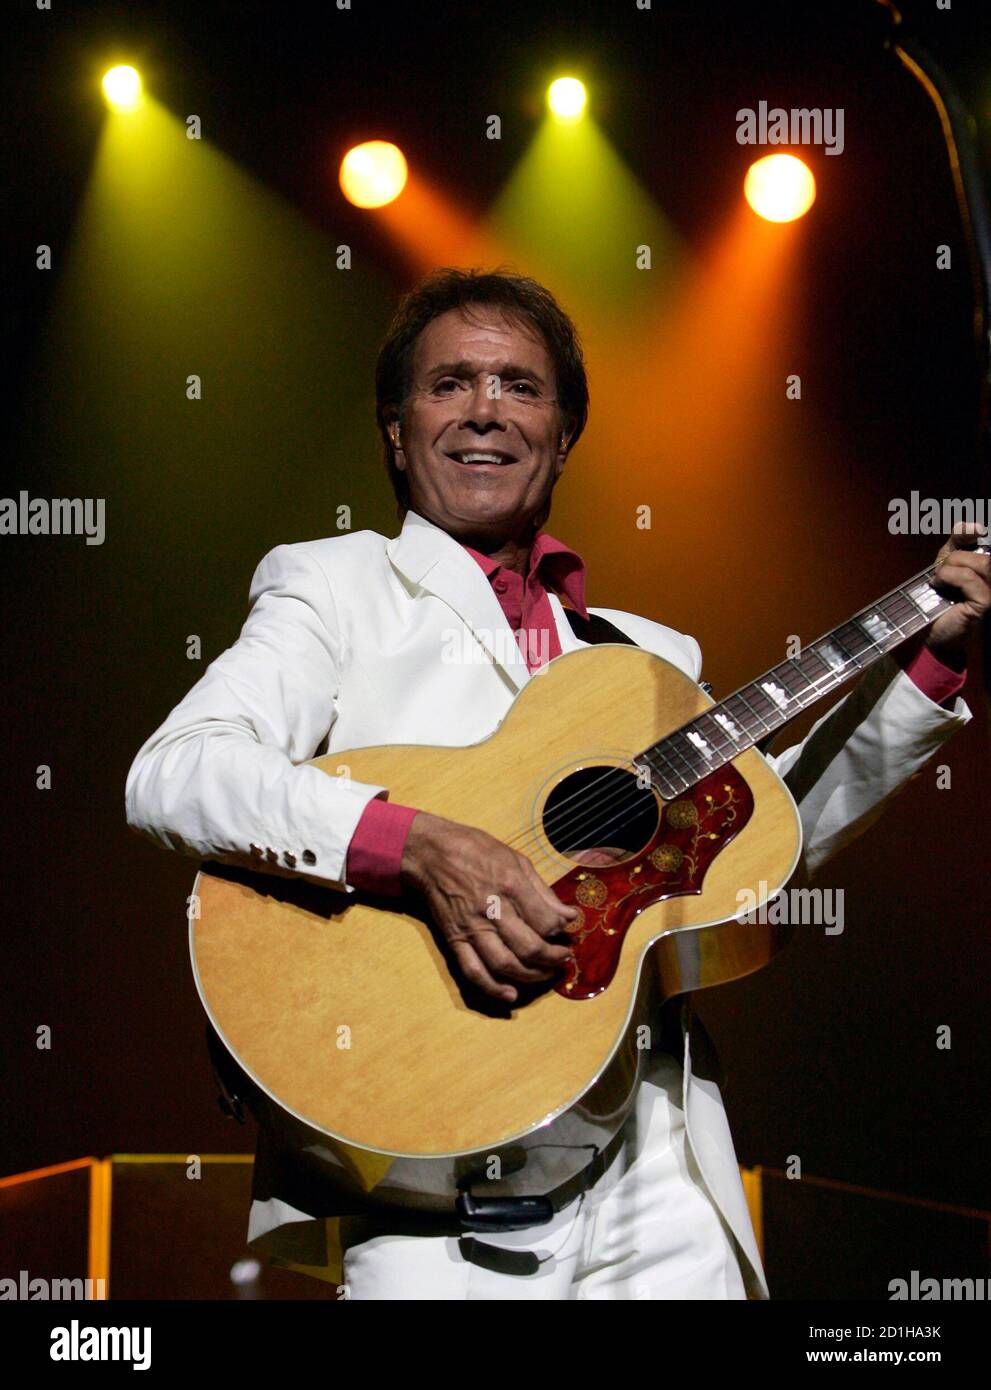 Cliff Richard performs at Carnival city in Johanesburg, March 2, 2007. REUTERS/Siphiwe Sibeko  (SOUTH AFRICA) Stock Photo